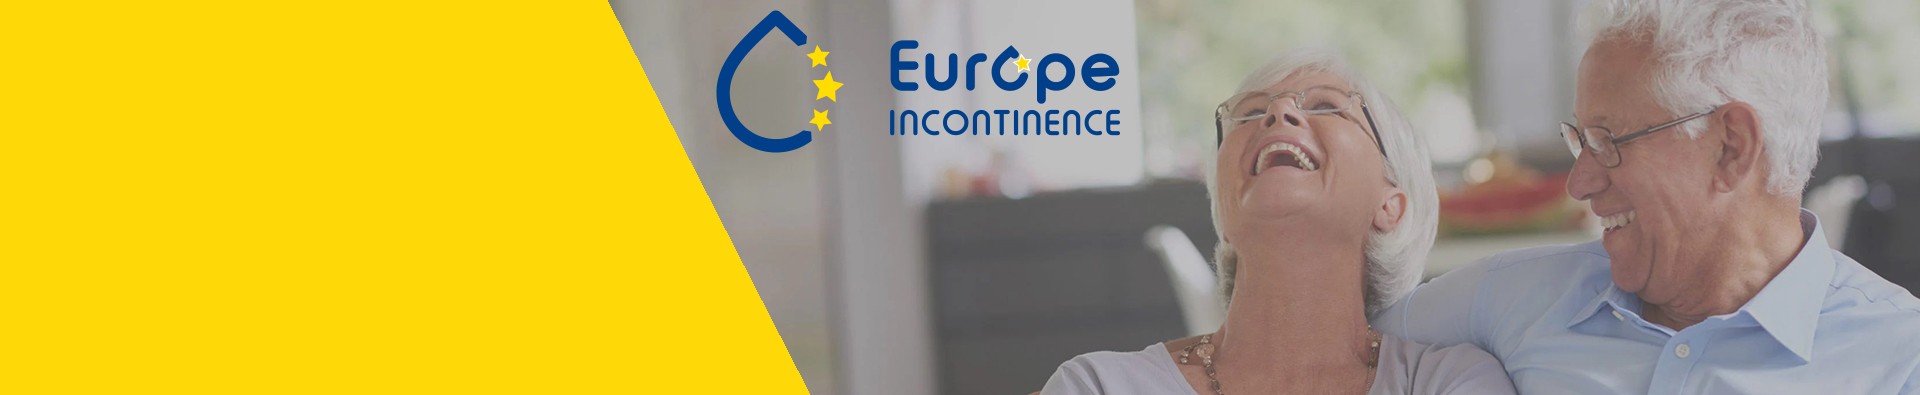 new-europe-incontinence